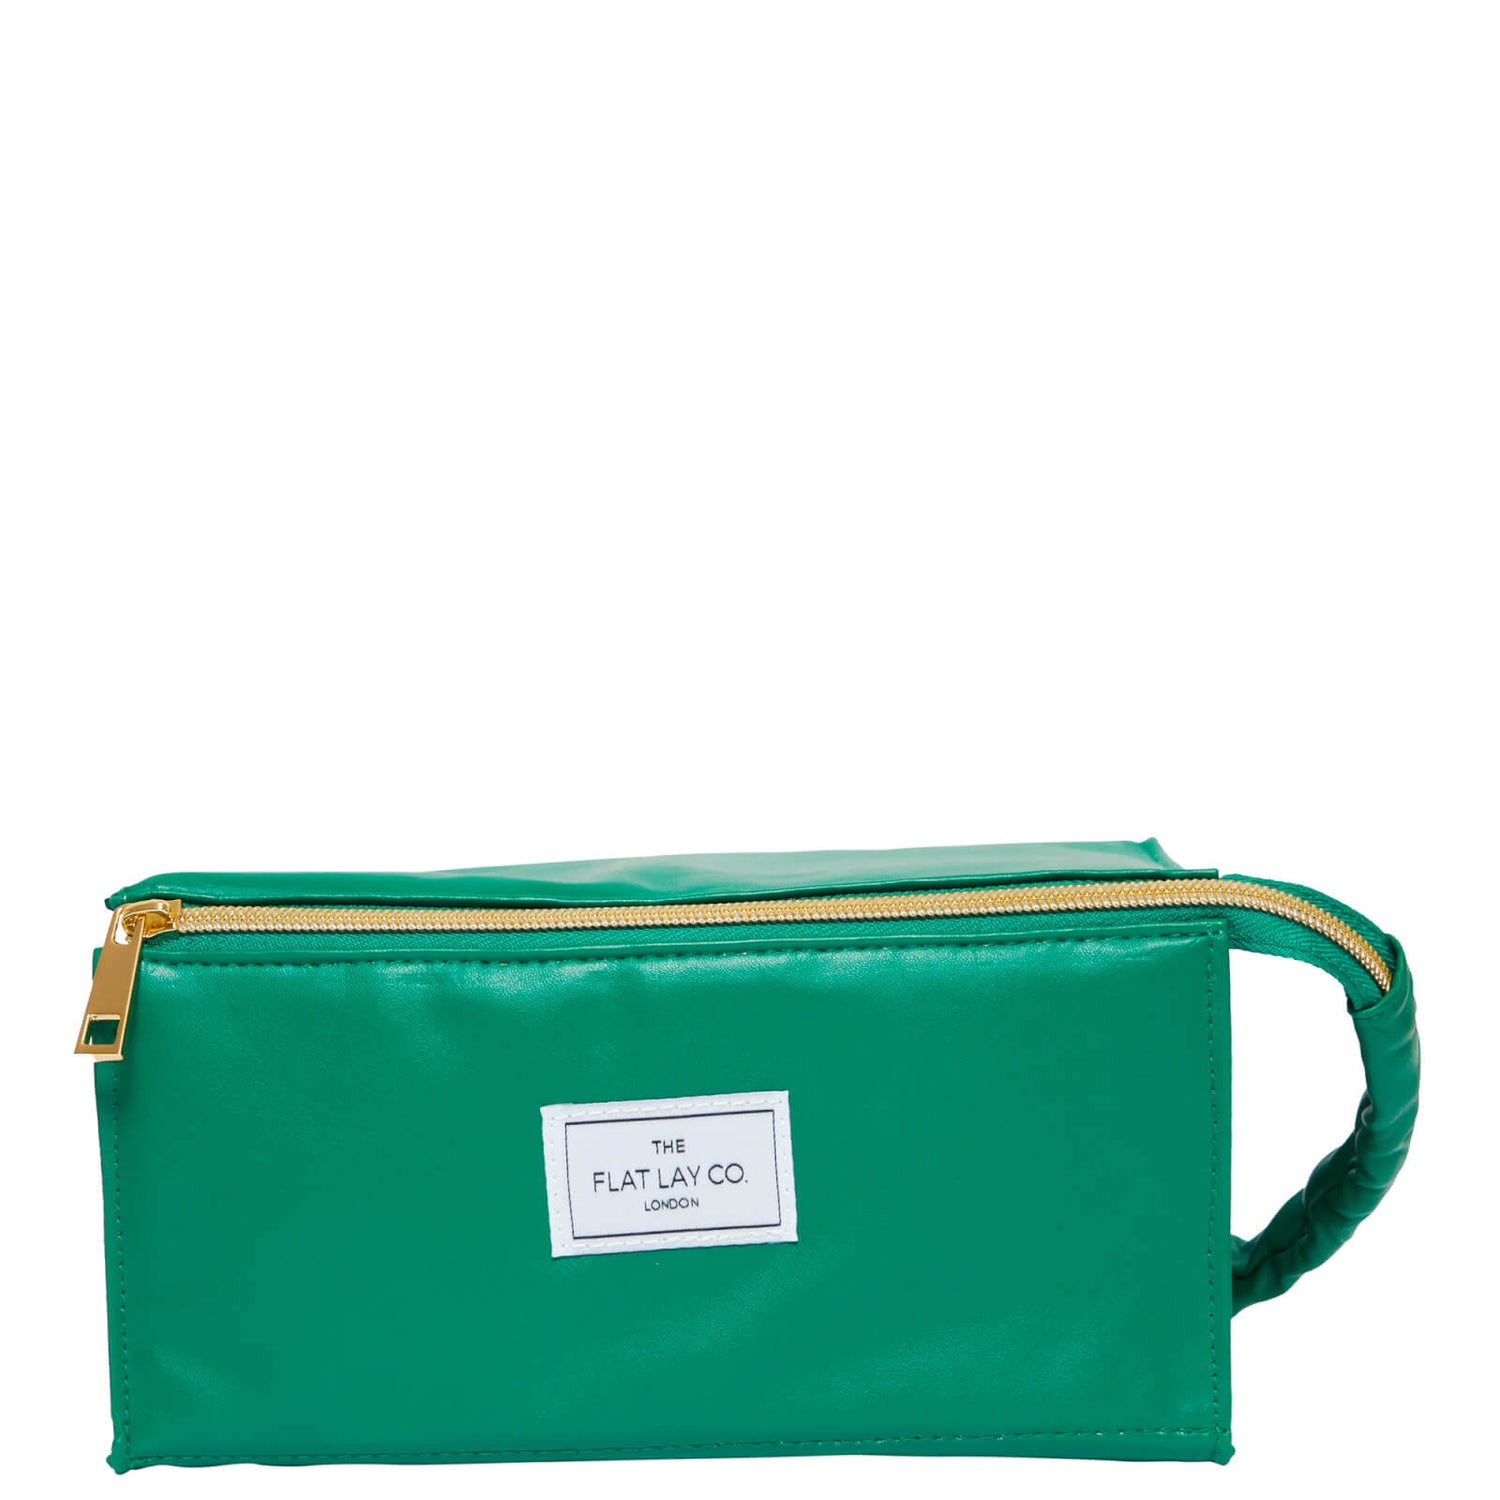 The Flat Lay Co. Open Flat Makeup Box Bag - Bottle Green Leather Monochrome